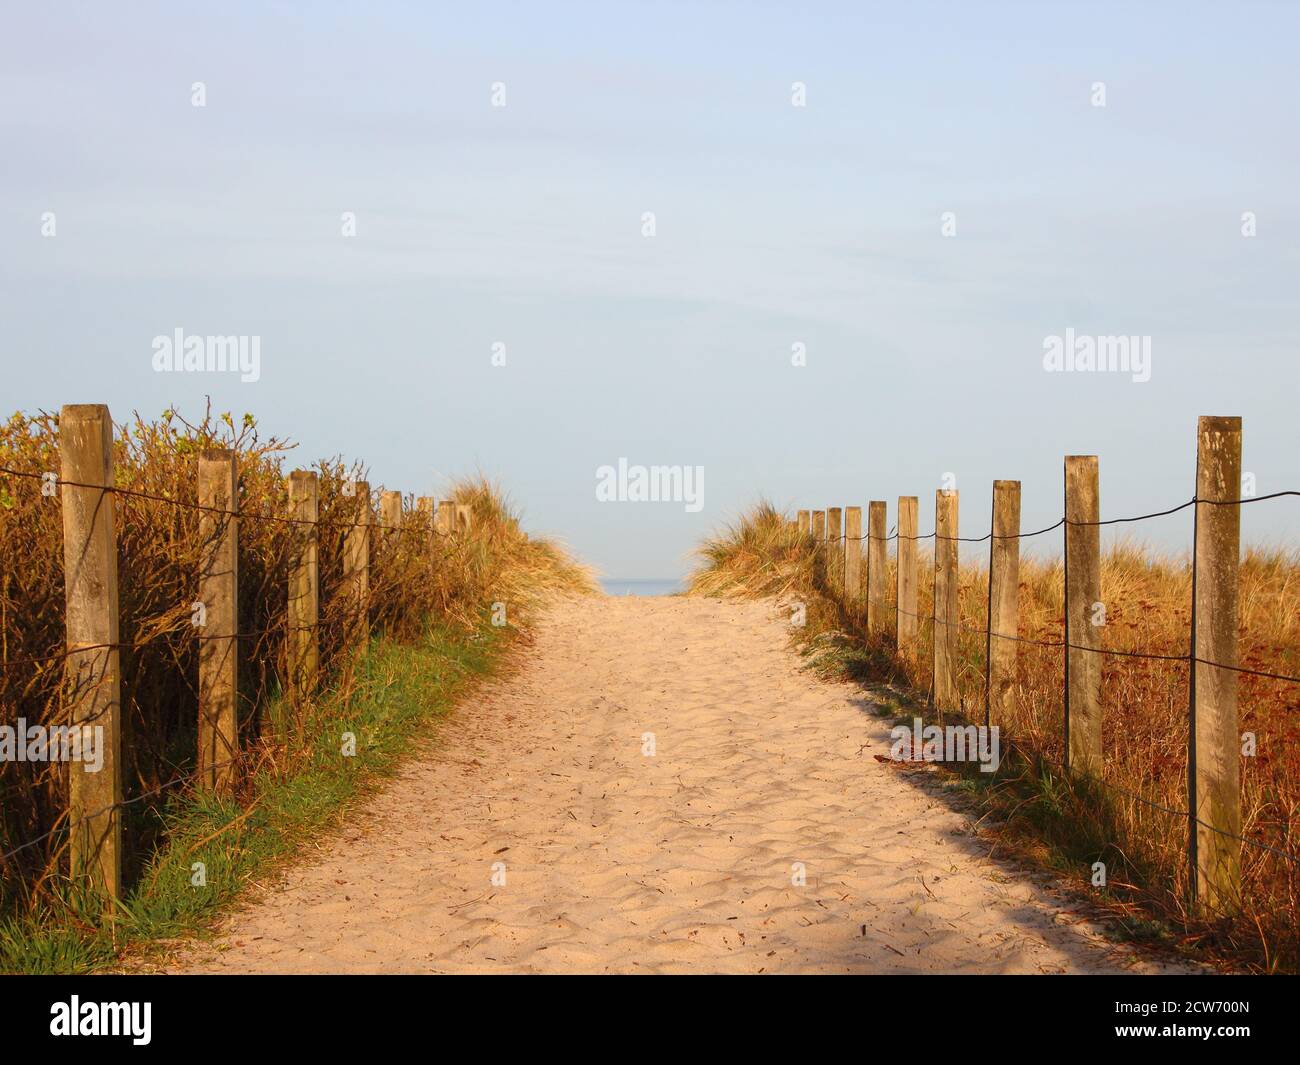 A sandy path leading towards the ocean, with light fencing on either side. Stock Photo